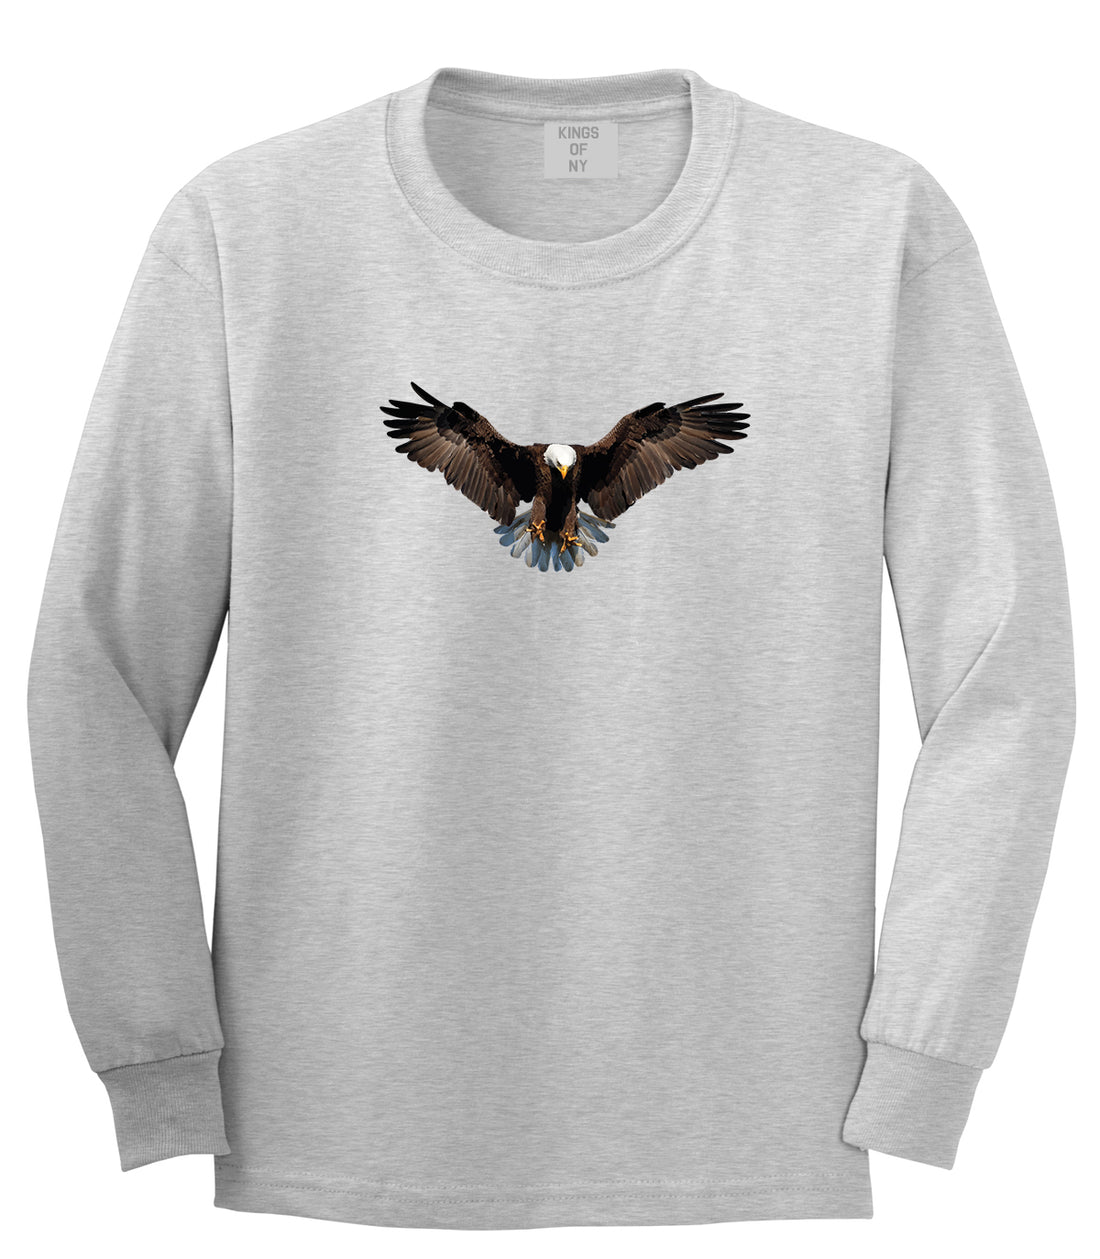 Bald Eagle Wings Spread Grey Long Sleeve T-Shirt by Kings Of NY